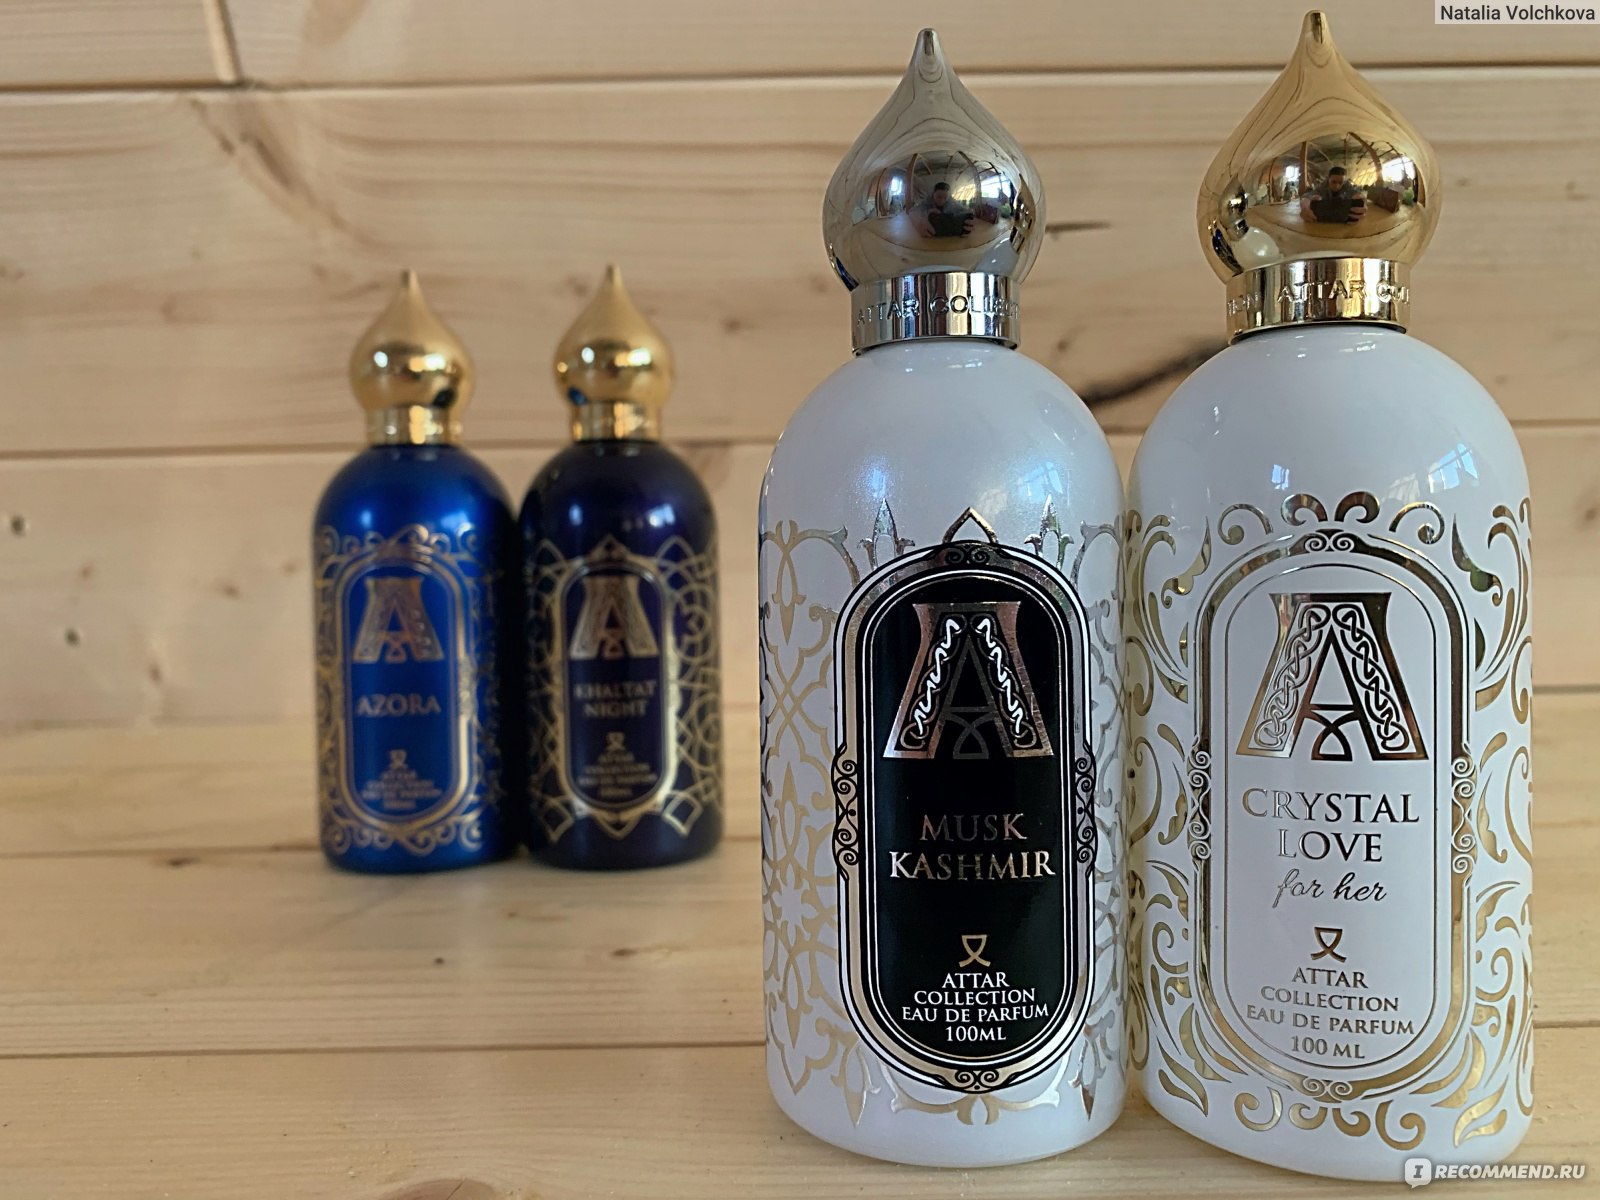 Атар азора. Духи Attar collection Crystal Love. Кристалла в Парфюм аттар. Духи Areej Attar collection. Духи Кристал лав аттар коллекшн.